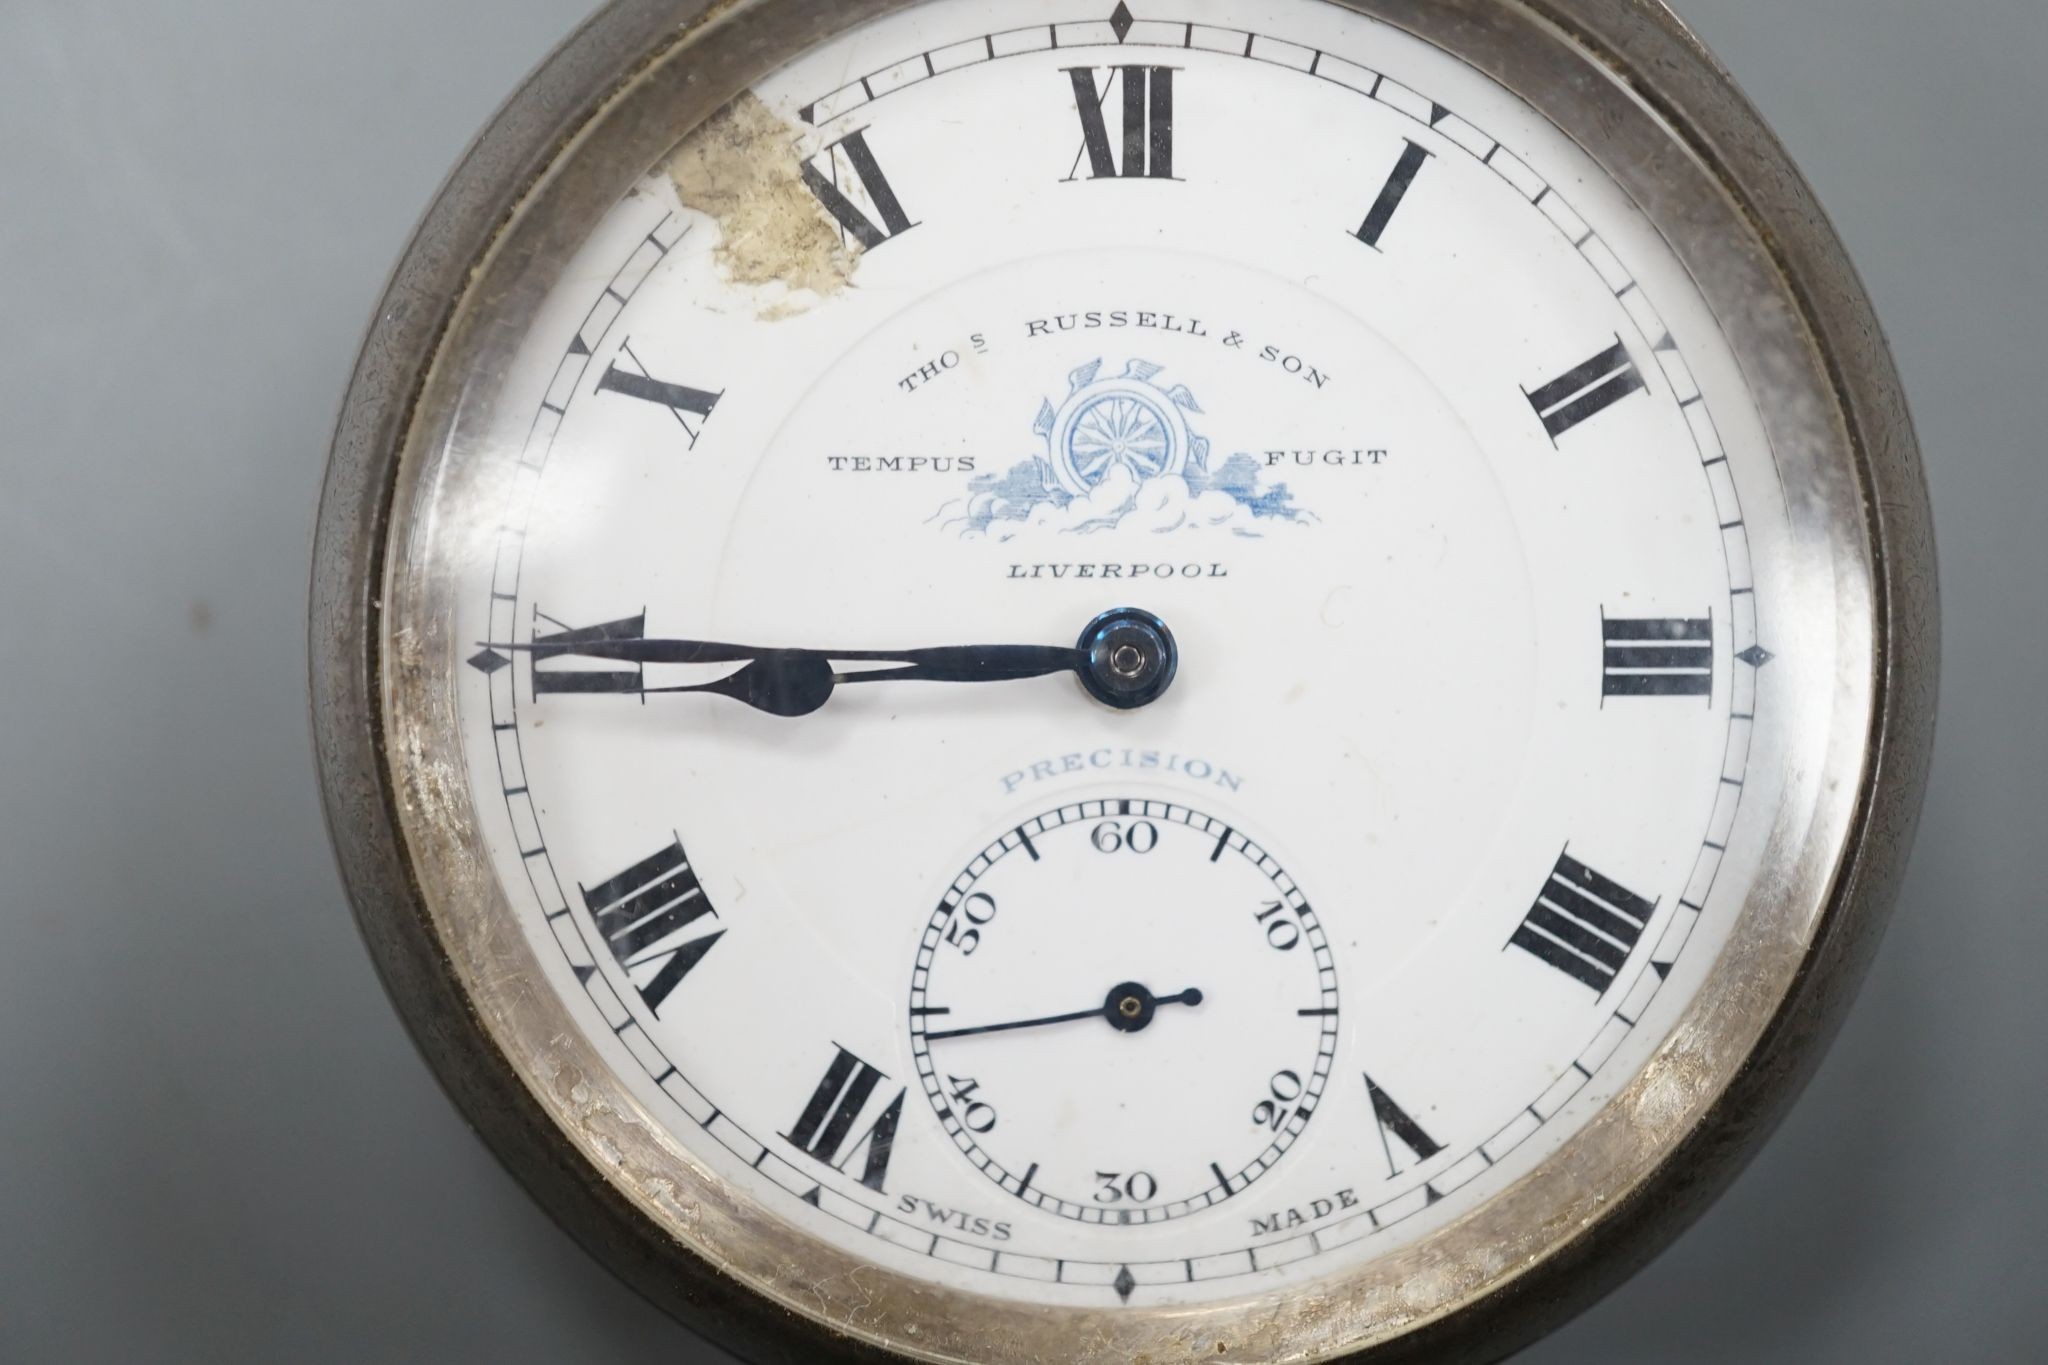 A George V silver open faced keyless pocket watch, by Thomas Russell & Son, Liverpool, with Roman dial and subsidiary seconds, (dial a.f.).